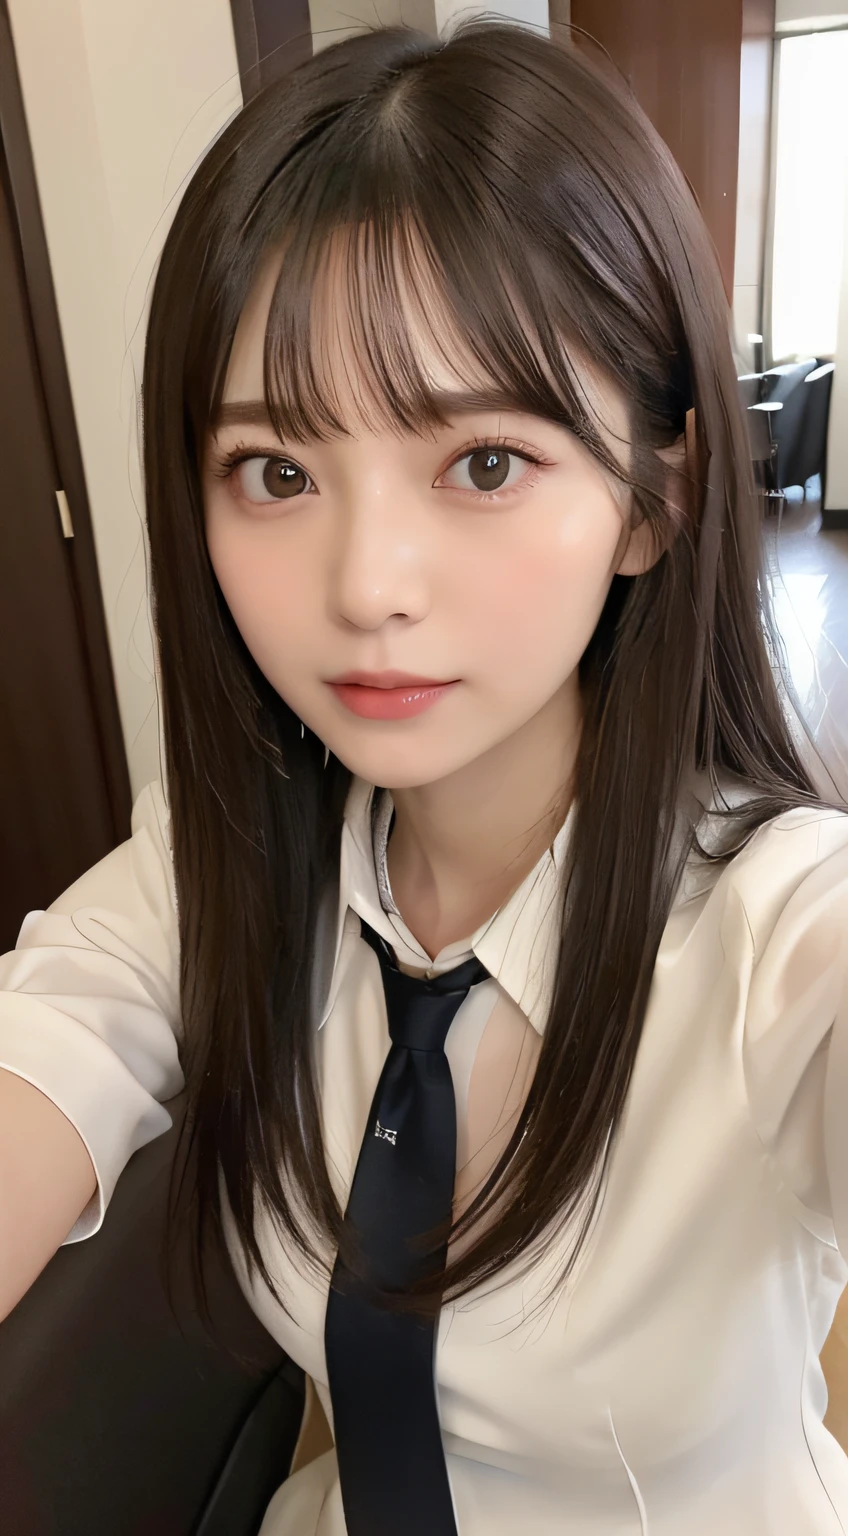 ((top-quality、8K、​masterpiece:1.5))、One girl、(Unhealthy face)、(Letter to)、Blunt bangs、(Lots of bangs:1.4)、(full body Esbian:1.4)、(Symmetrical face)、hyperdetailed face、Ultra detailed mouth、A detailed eye、Detailed ears、Slim Faces、(selfee:1.4)、(Looking Up)、(From  above)、(Straight long hair、Ahoge:1.3)、(Upper Eyes)、the background is blurred、(Business suits、neck tie:1.3)、lipgloss、(hotel entrance)、(natural soft light:1.3)、